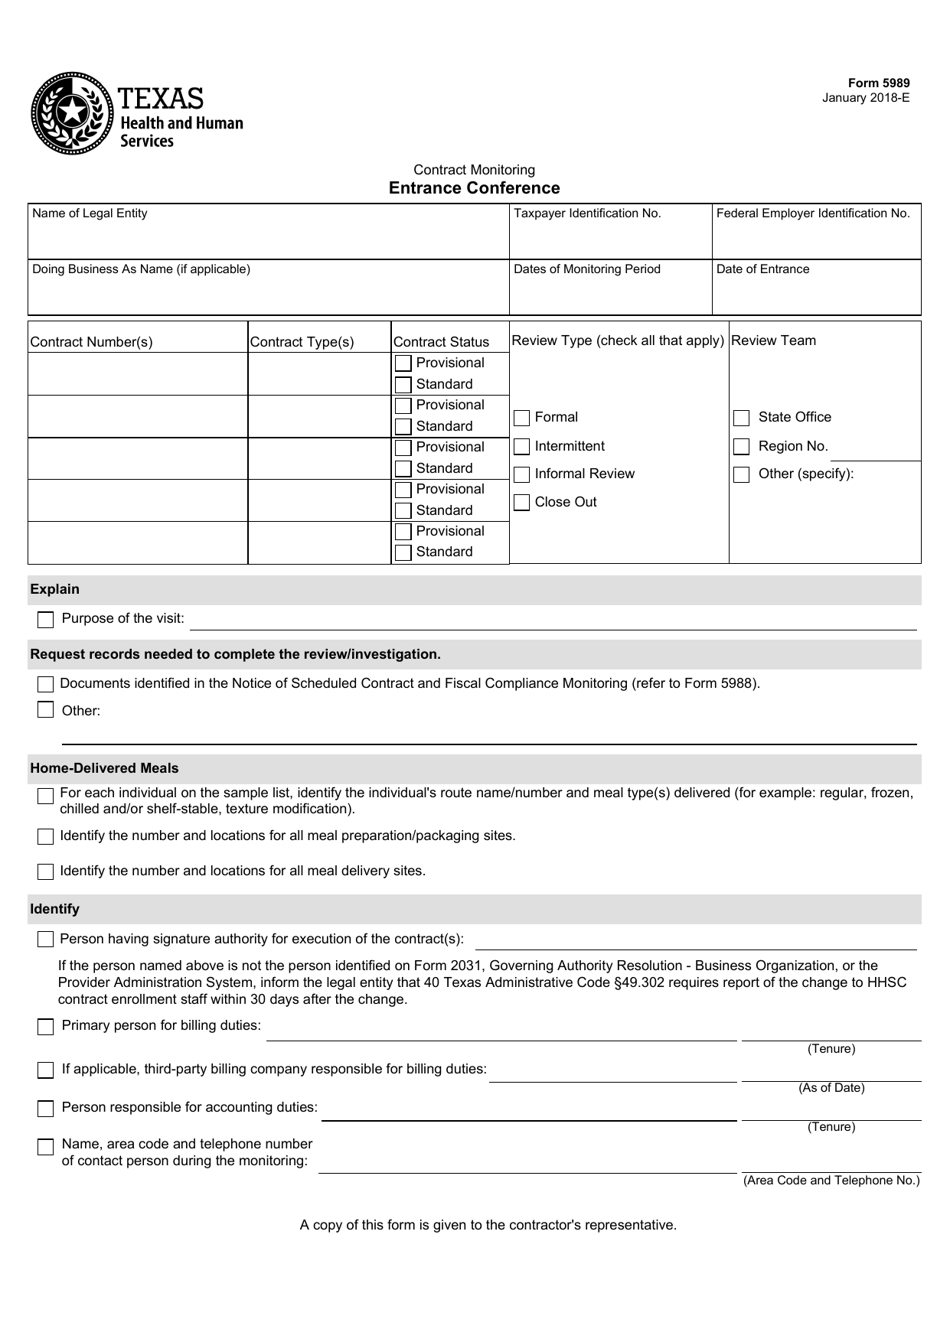 Form 5989 Entrance Conference - Texas, Page 1